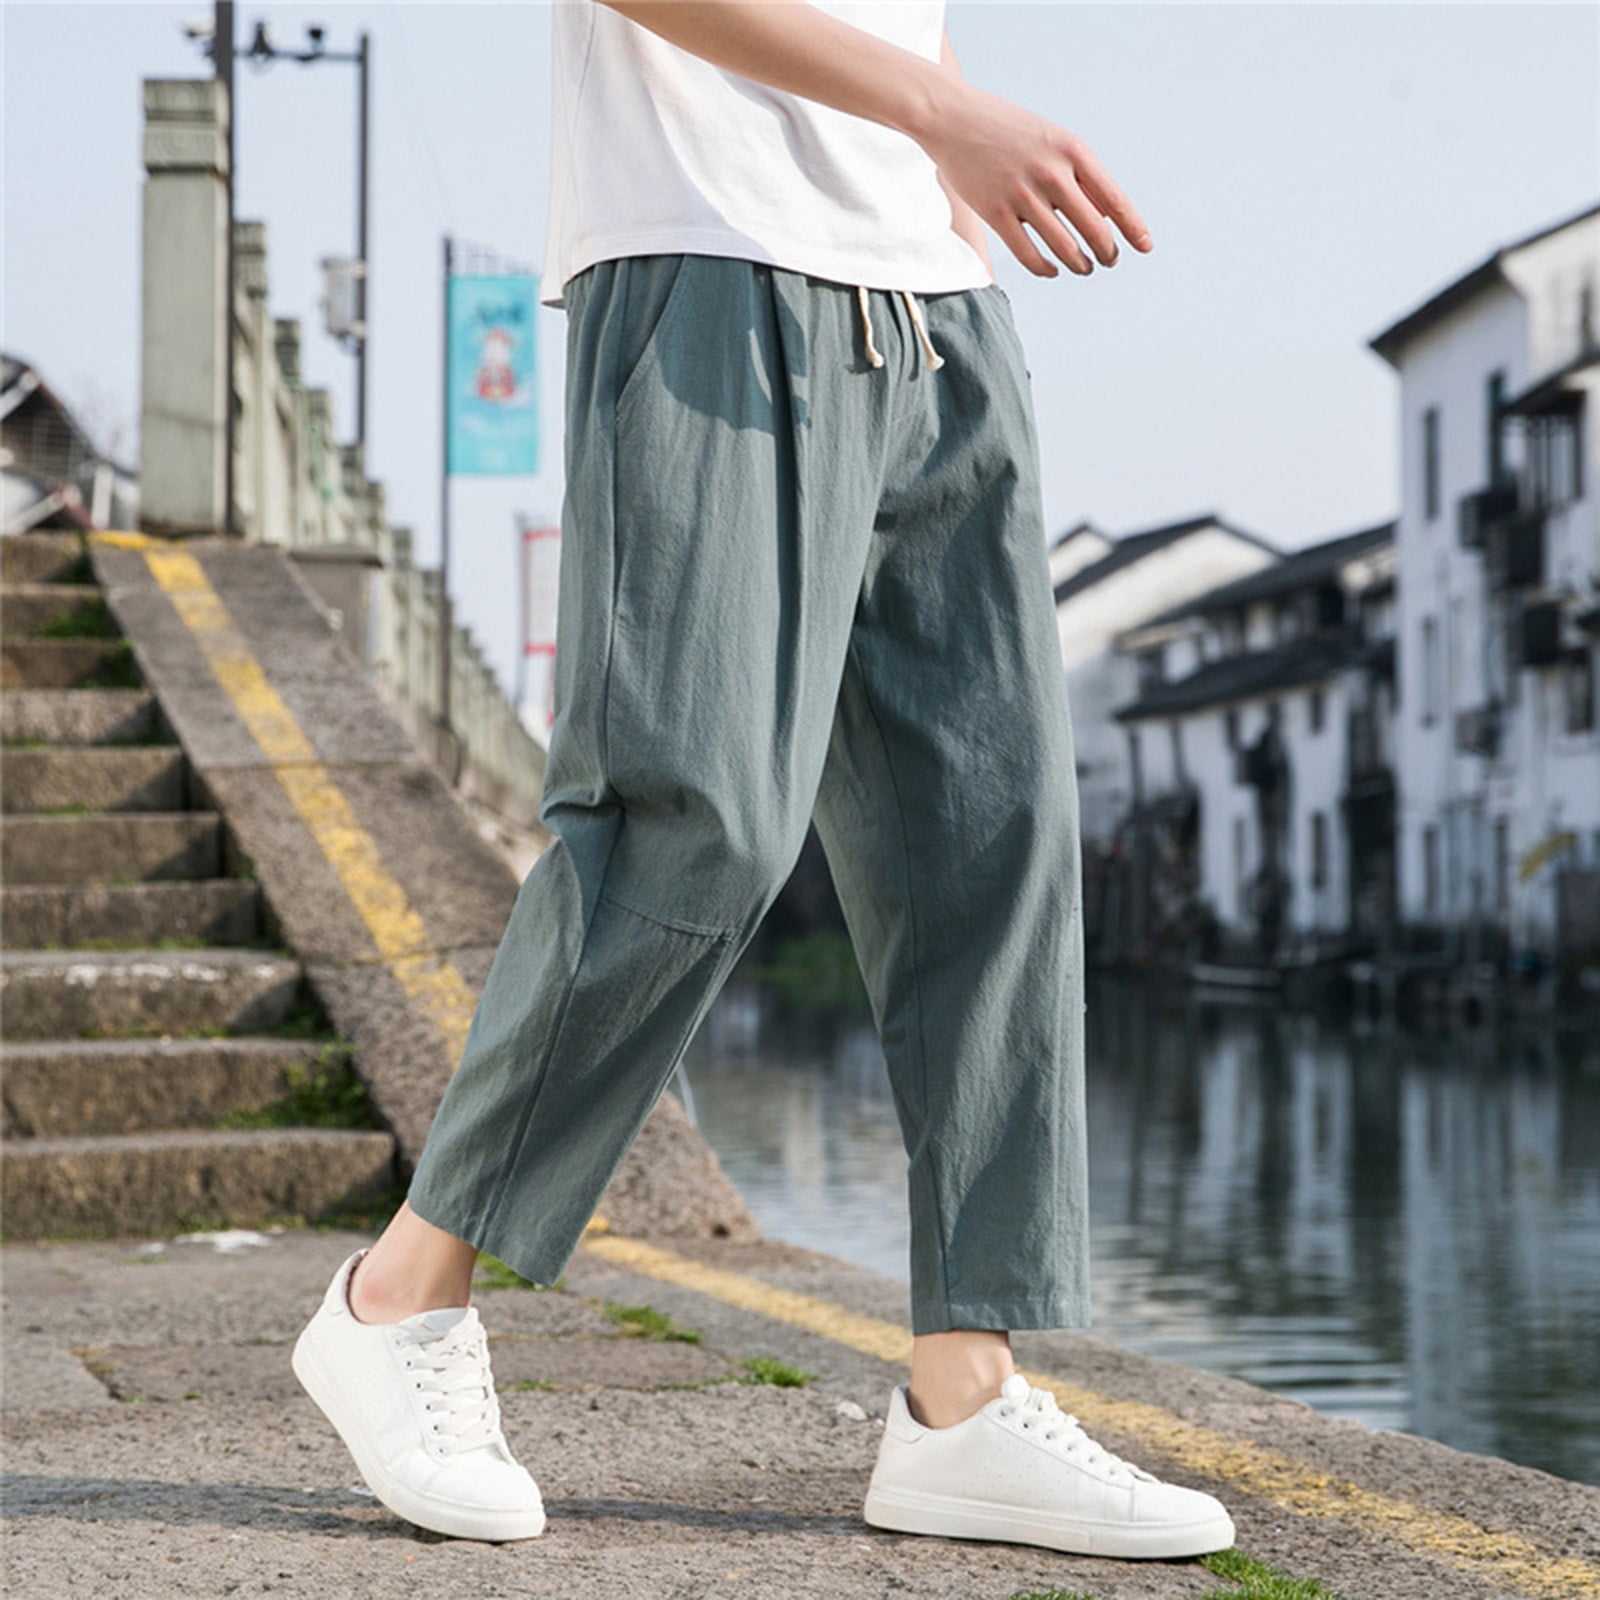 Khaki Cargo Pants For Men Mens Spring And Summer Casual Pants Mens Wild  Cotton And Linen Loose Linen Pants Korean Version Of The Trend Pants  Straight Tube  Walmartcom